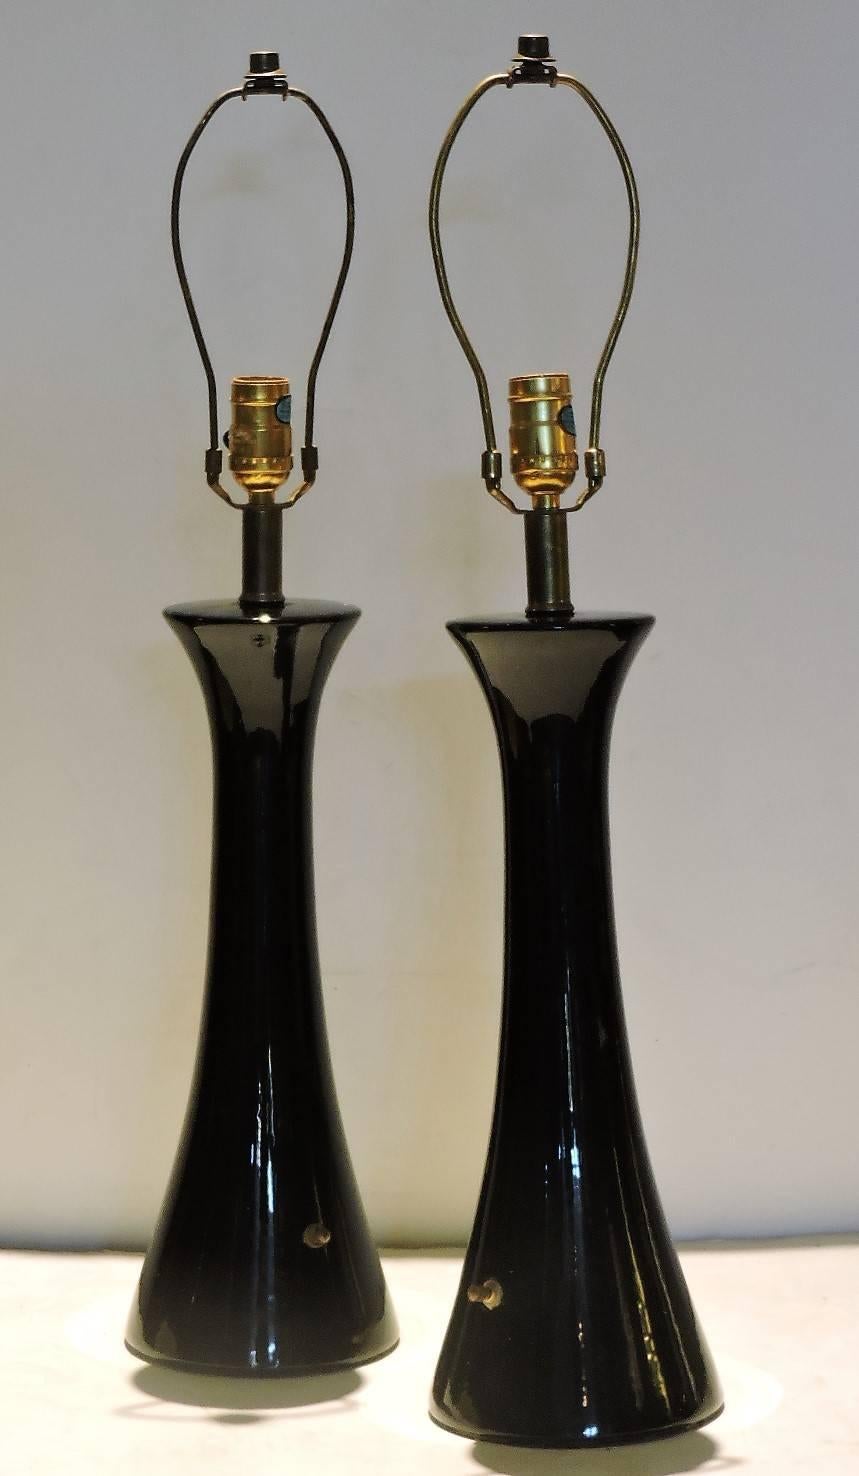 Pair of mid-20th century modernist hourglass form high gloss black glazed ceramic lamps with a clean simple design that would be compatible for many interior styles.